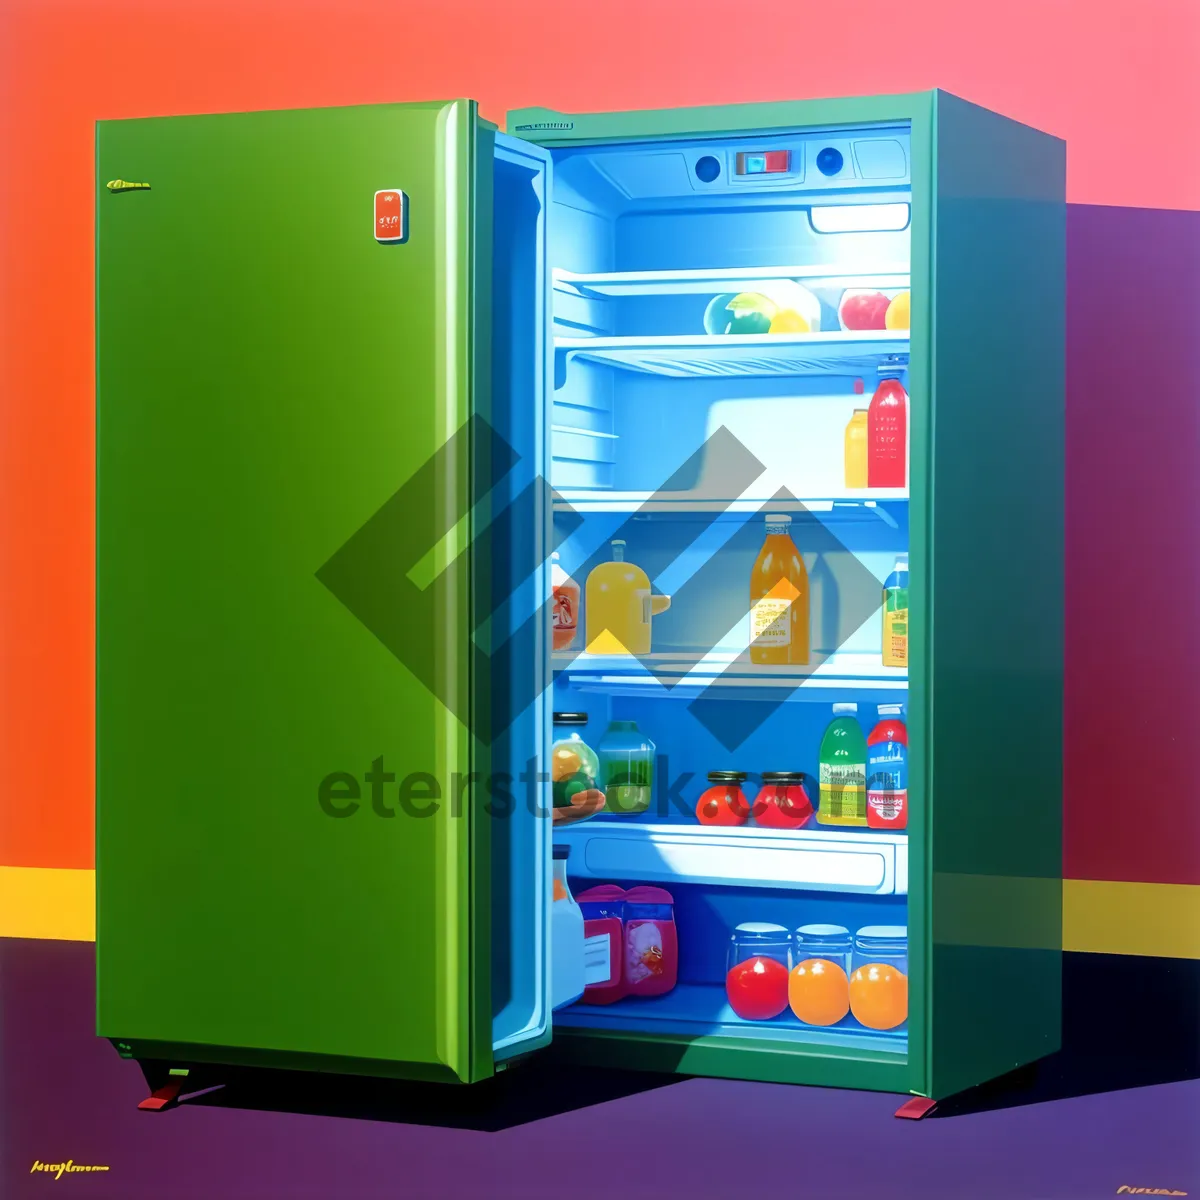 Picture of Advanced Vending Machine for Smart Business Solutions